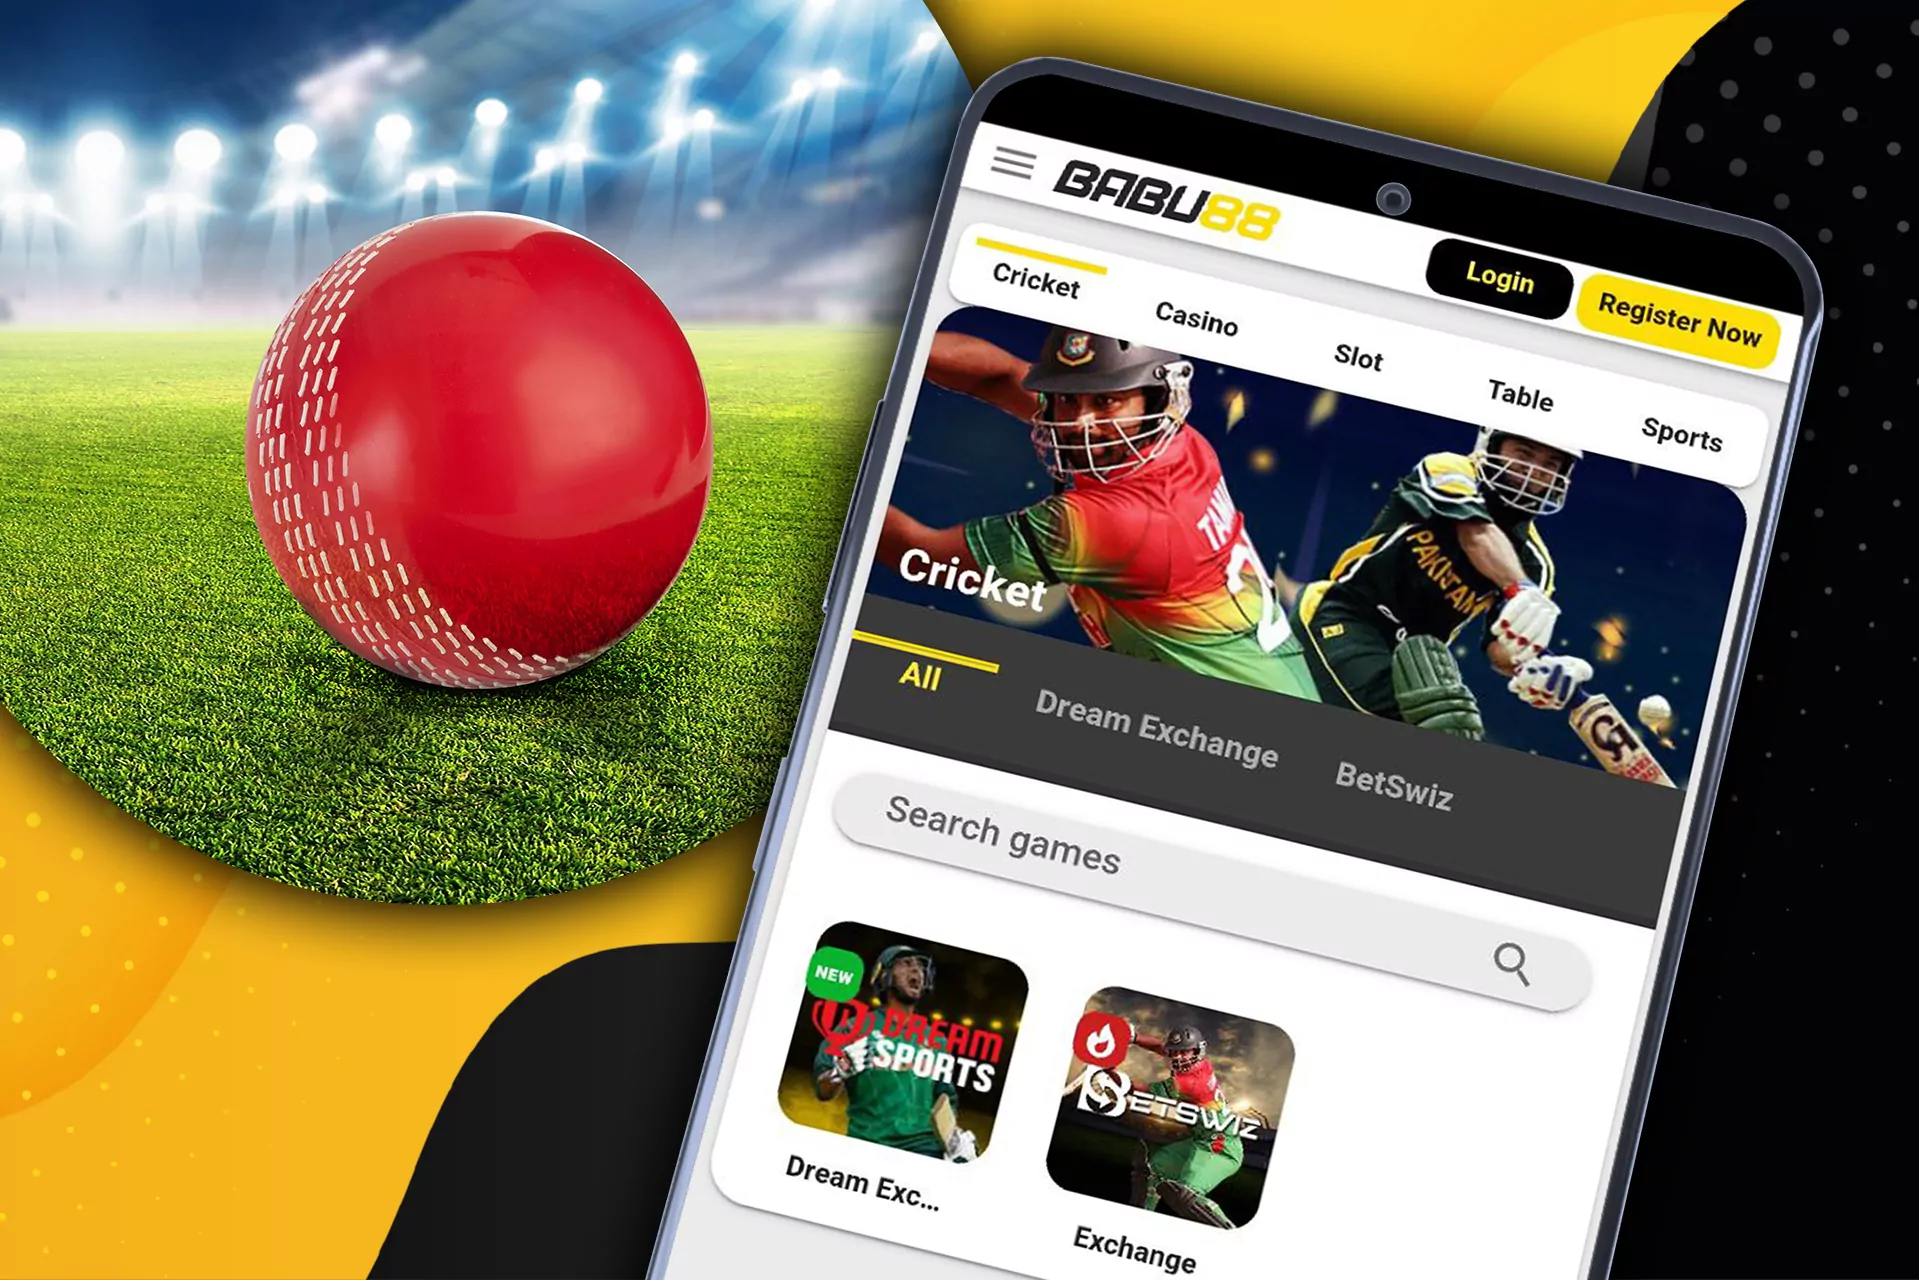 Place bets on cricket via your Babu88 mobile app.